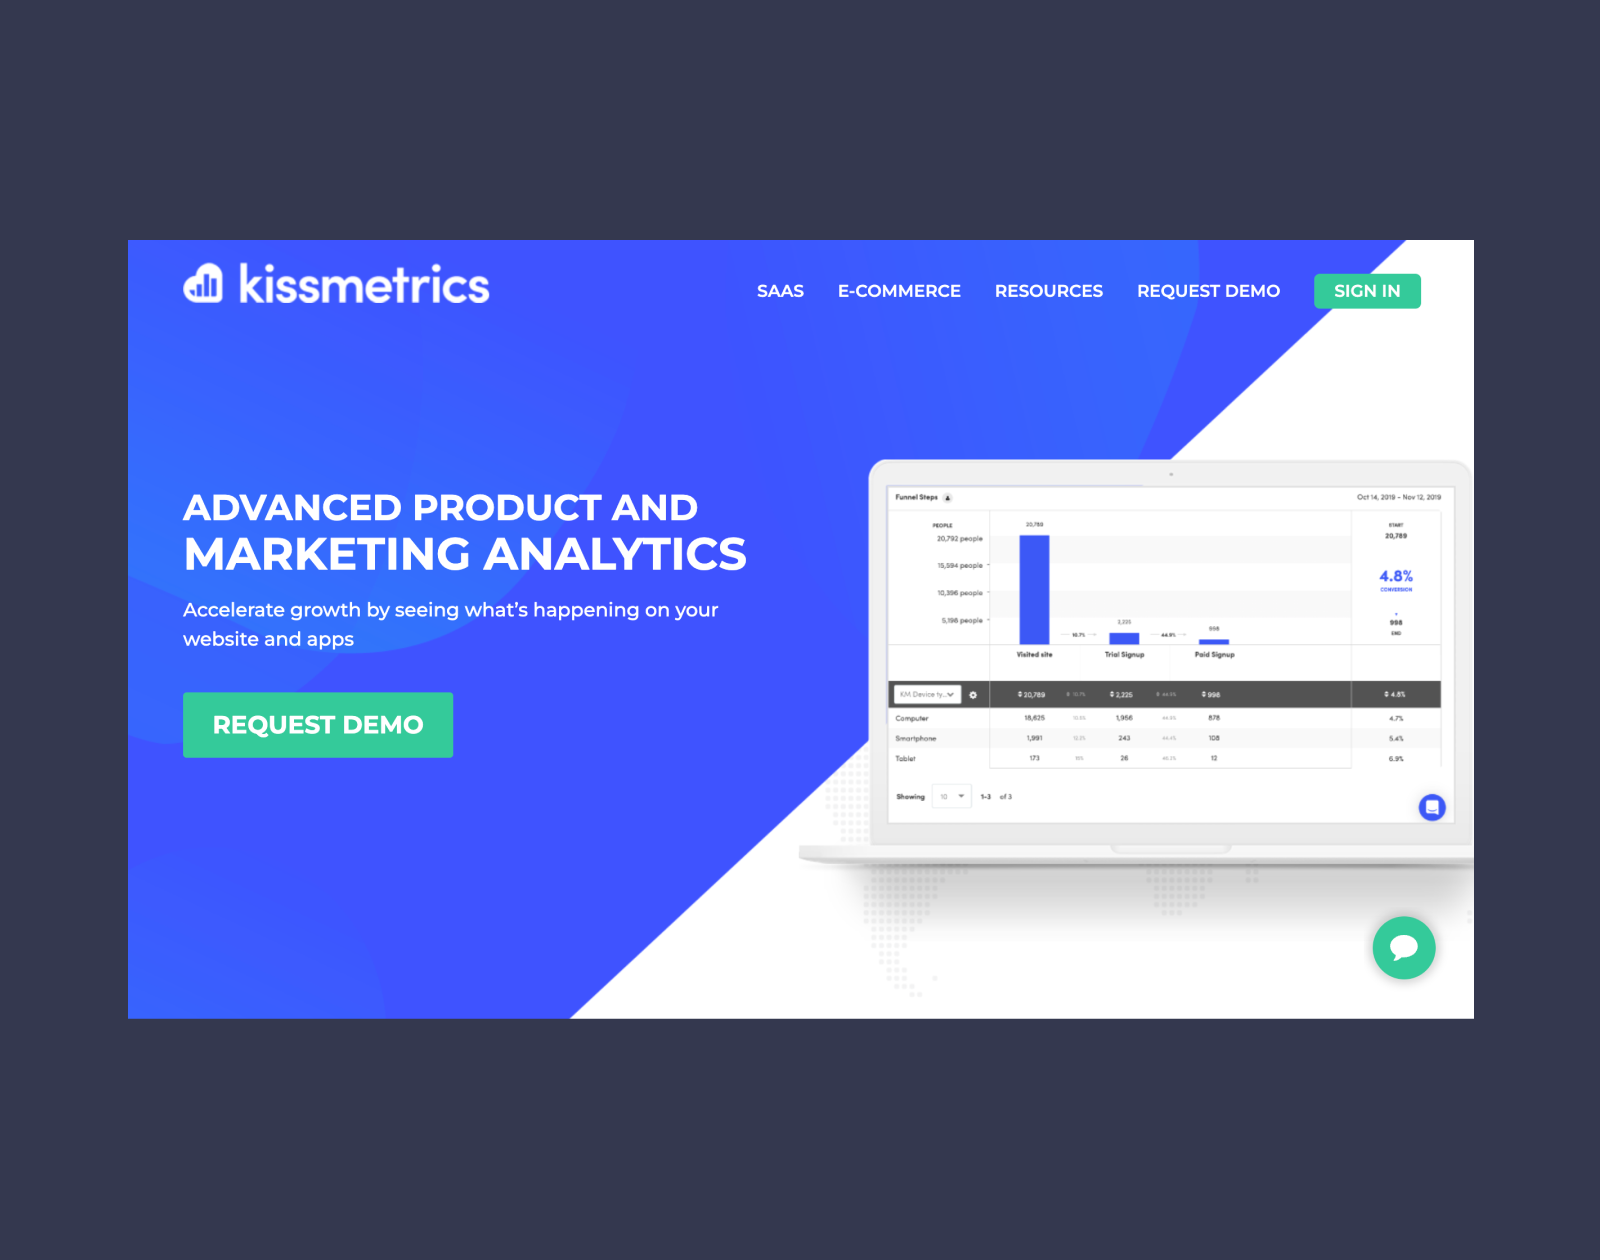 Kissmetrics: analyze, segment and engage all in one place